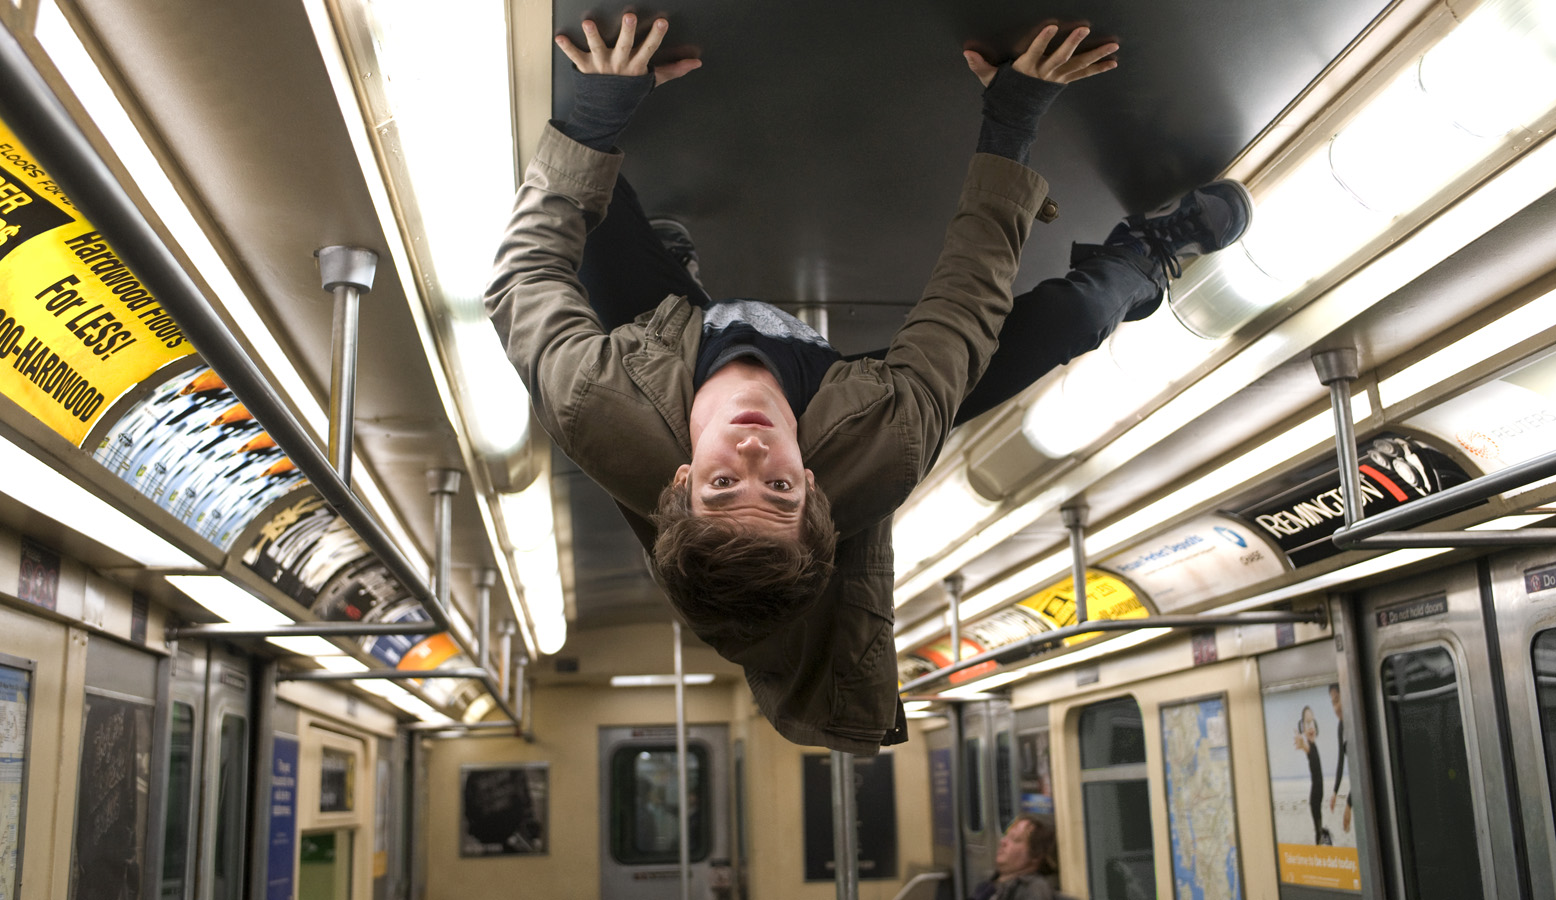 THE VIEW FROM UP HERE. Andrew Garfield’s Peter Parker gets some train-ing